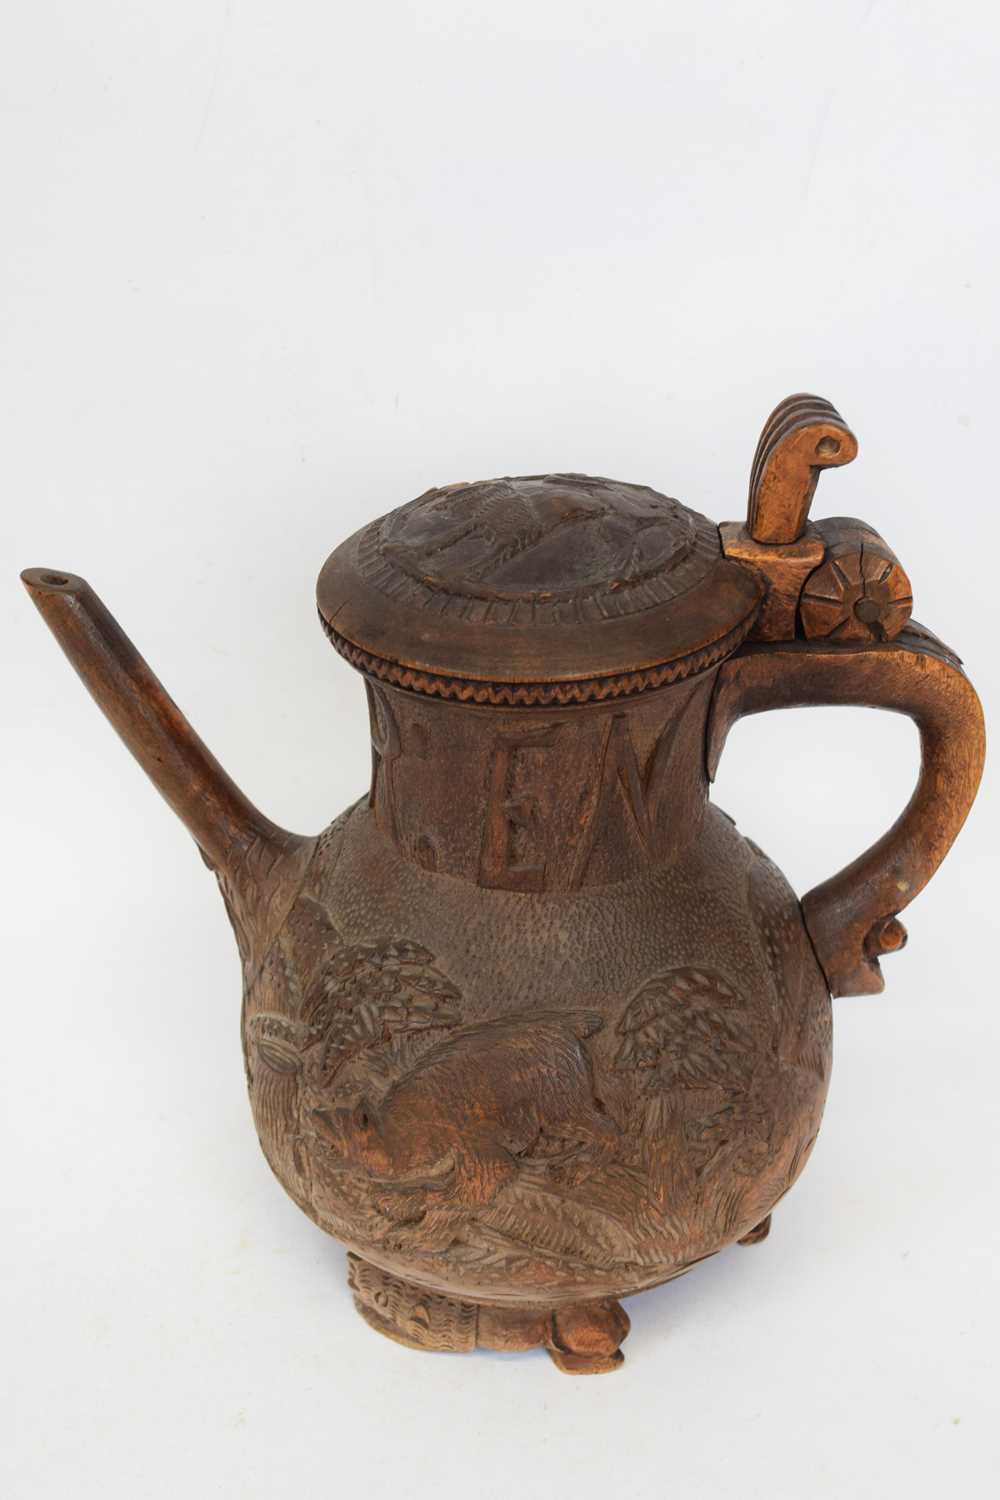 An unusual European, probably Black Forest, wooden coffee pot, probably for marriage, the neck